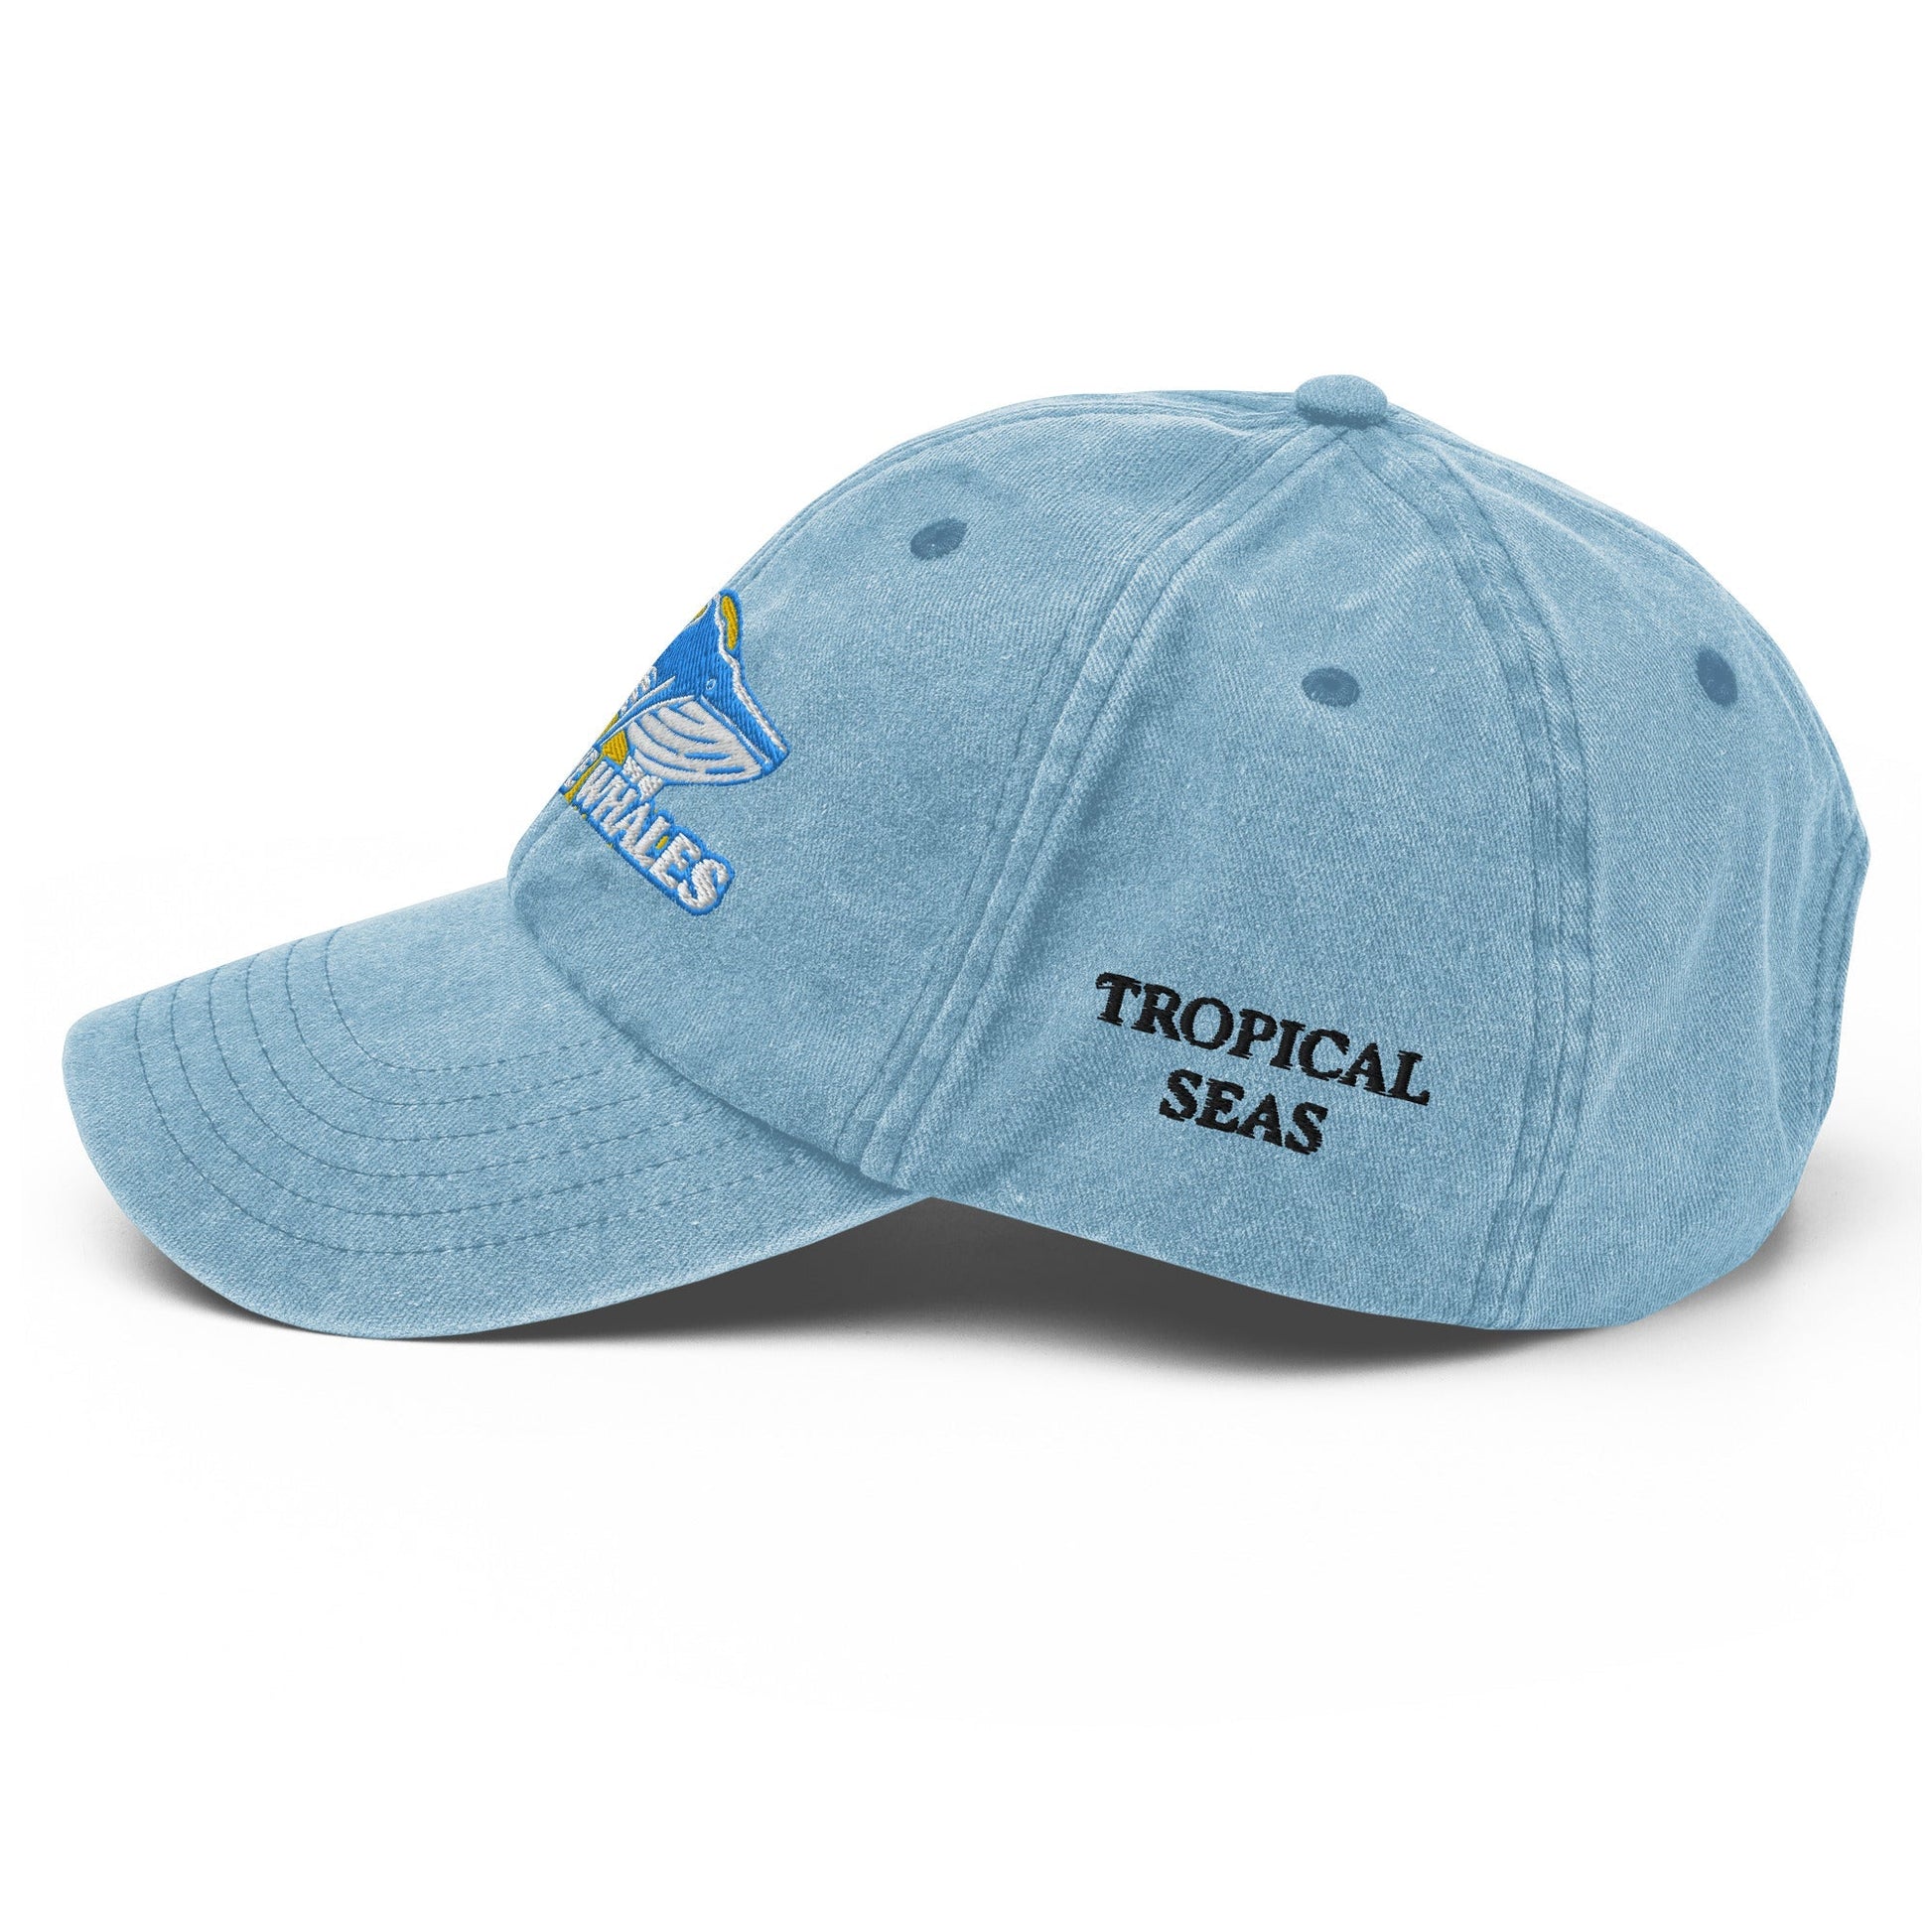 Vintage Save the Whales Hat - Tropical Seas Clothing 